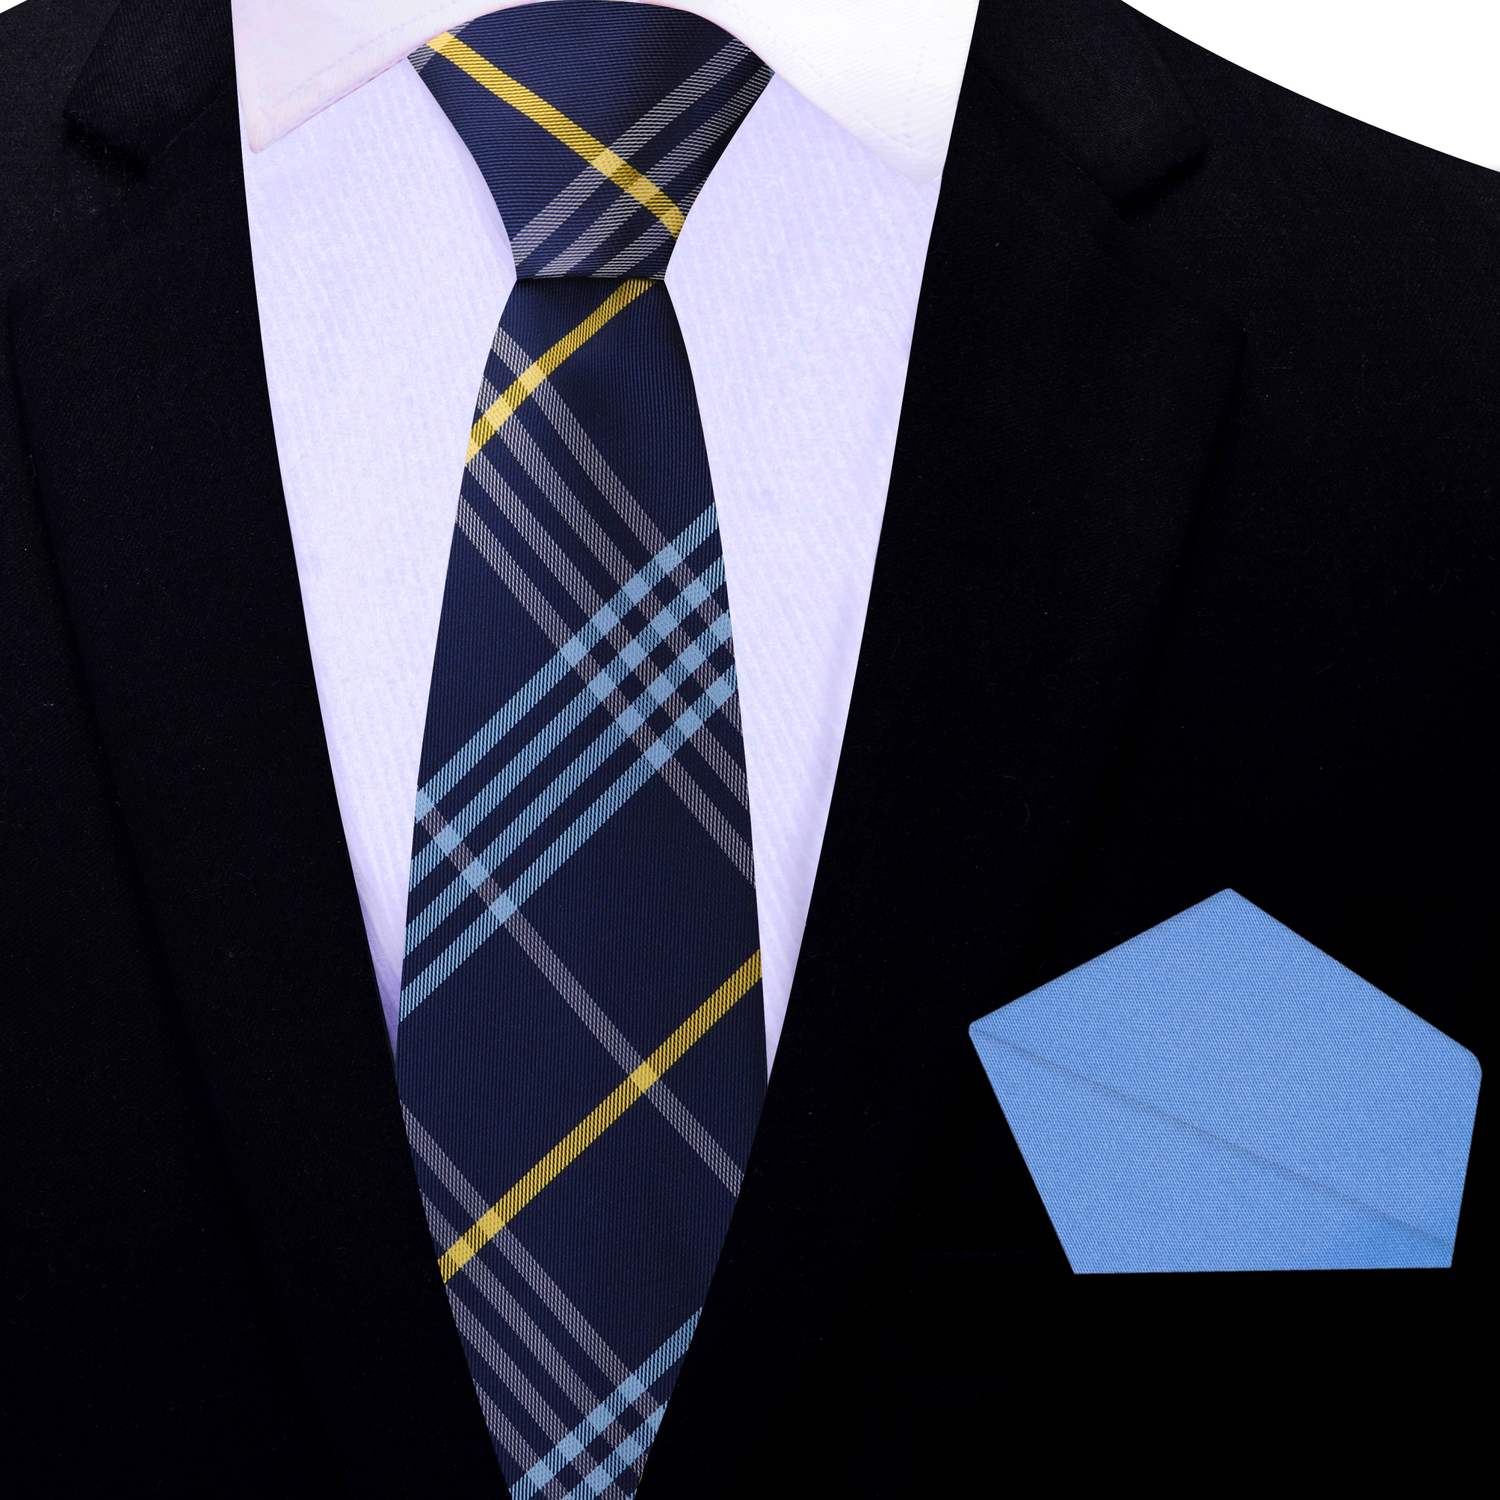 Thin Tie: Blue and Yellow Plaid Necktie with Light Blue Square